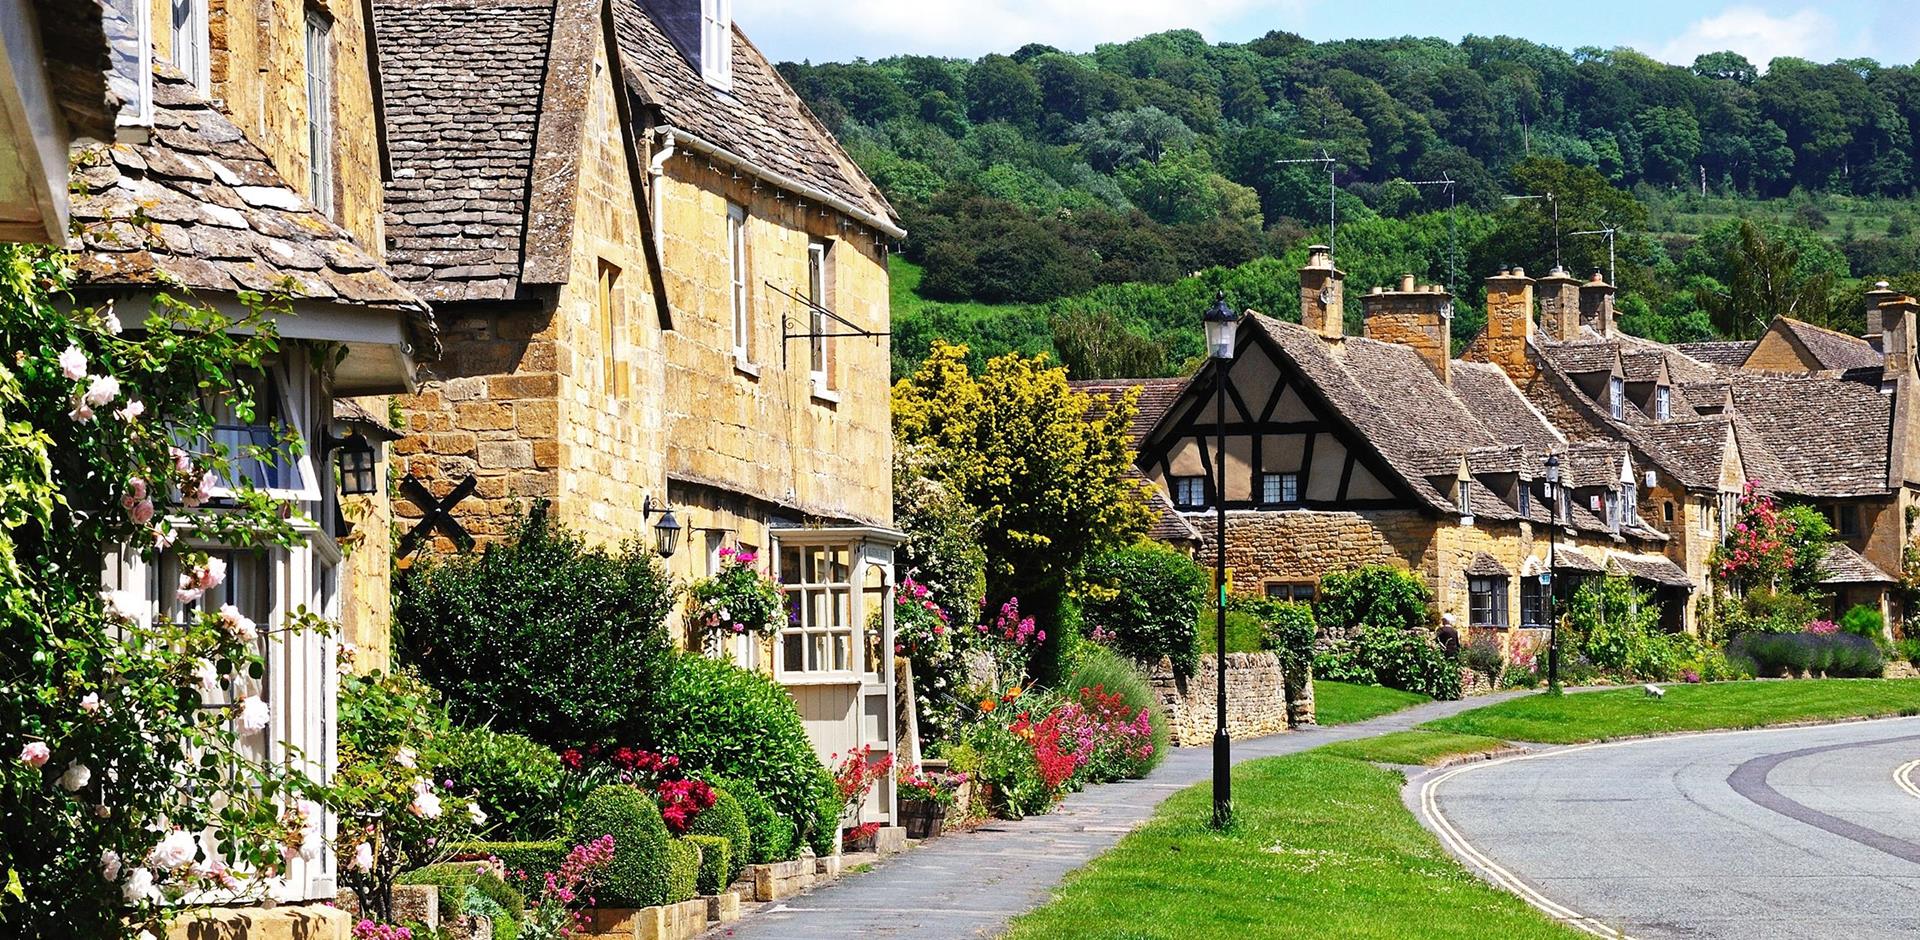 Broadway, The Cotswolds. UK